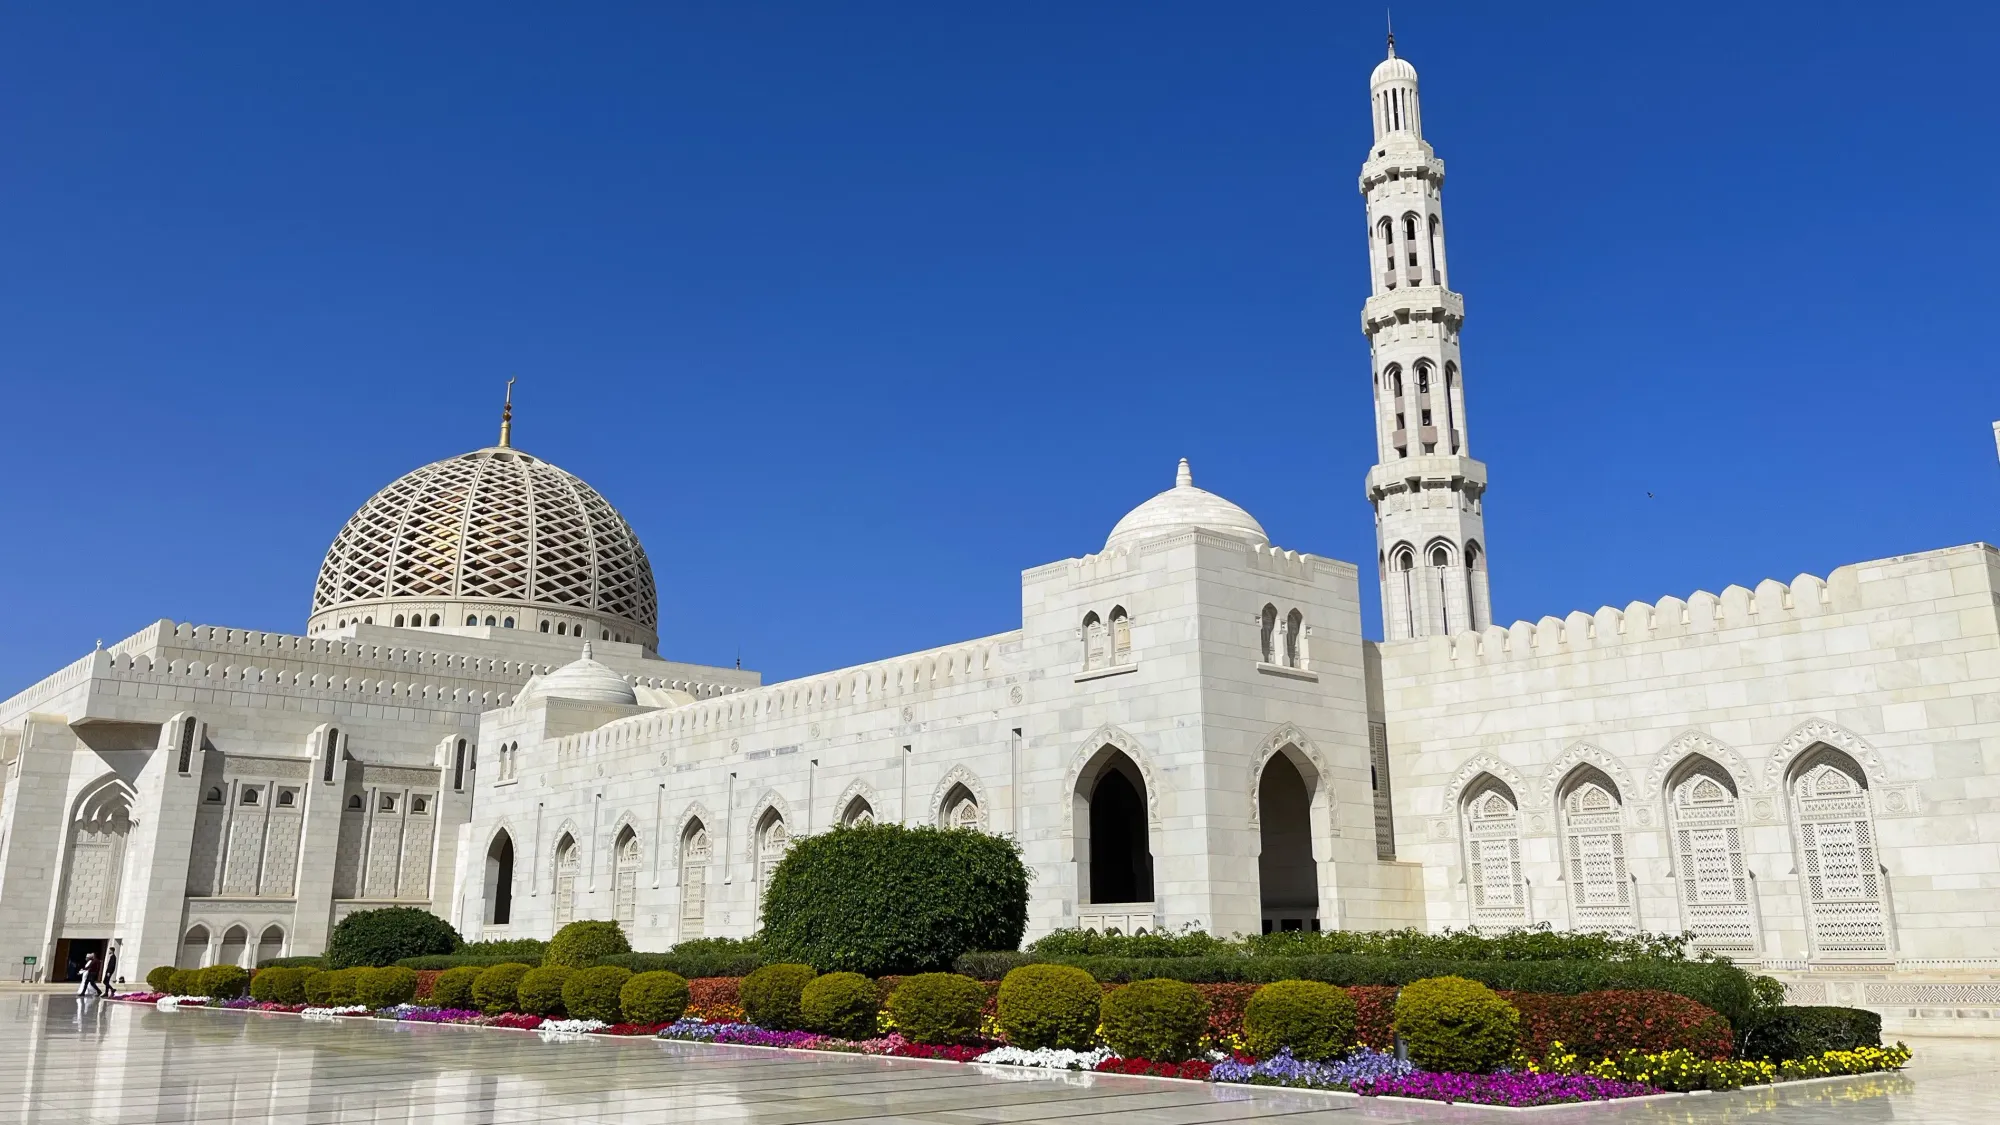 White exterior of the Sultan Qaboos Grand Mosque with a colorful flowerbed in front of it